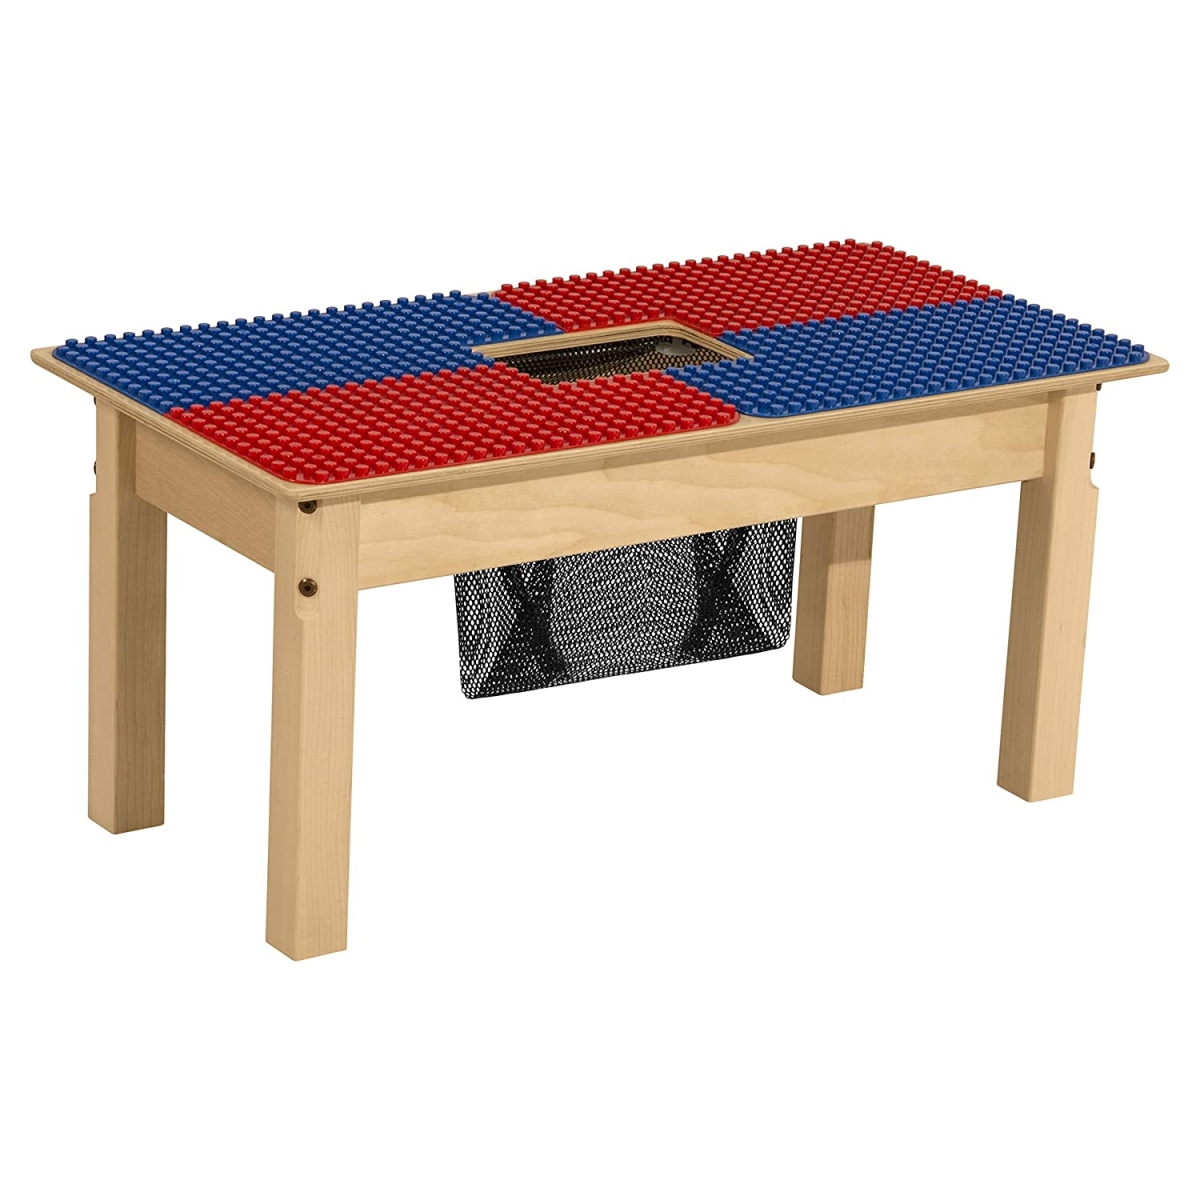 Tp1631pgn16-br 16 In. Duplo Compatible Table With Legs, Blue & Red - Square